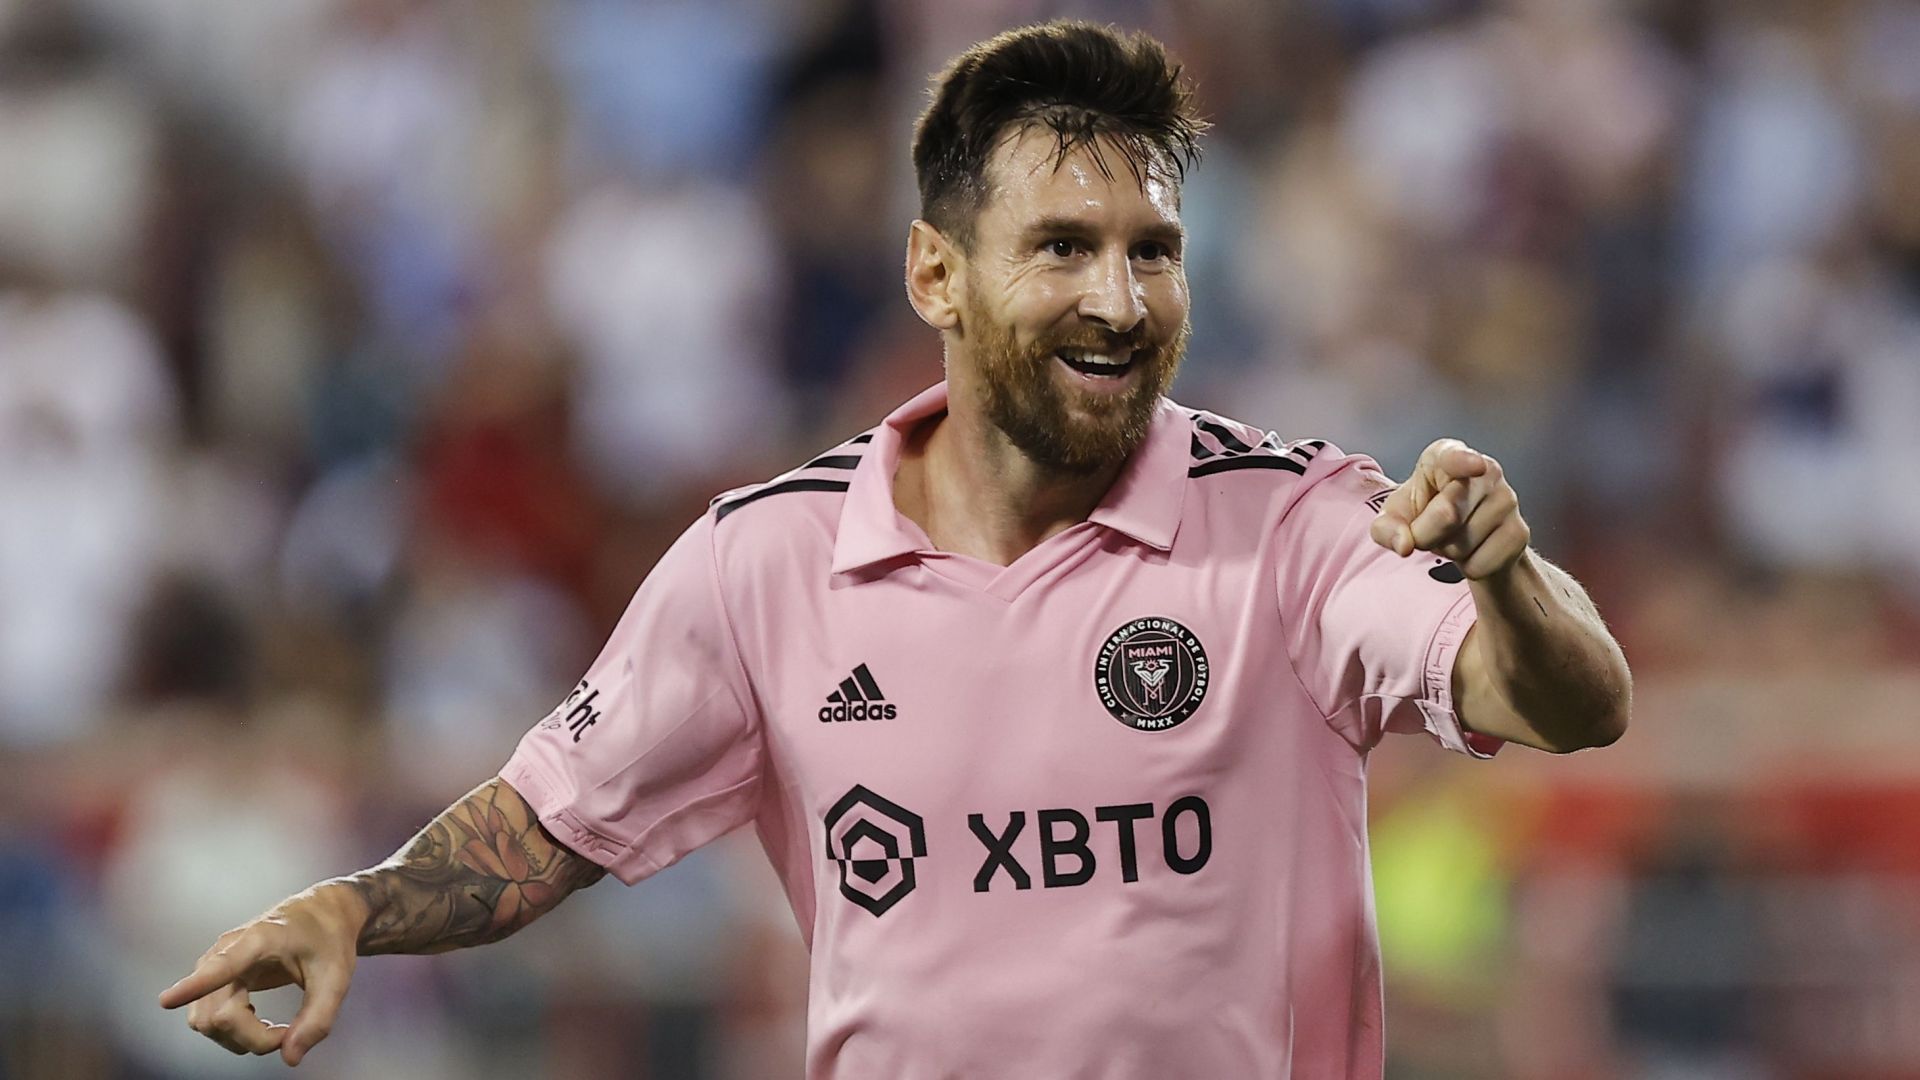 The Argentine did not speak to the press after his side&#039;s MLS win over New York Red Bulls.